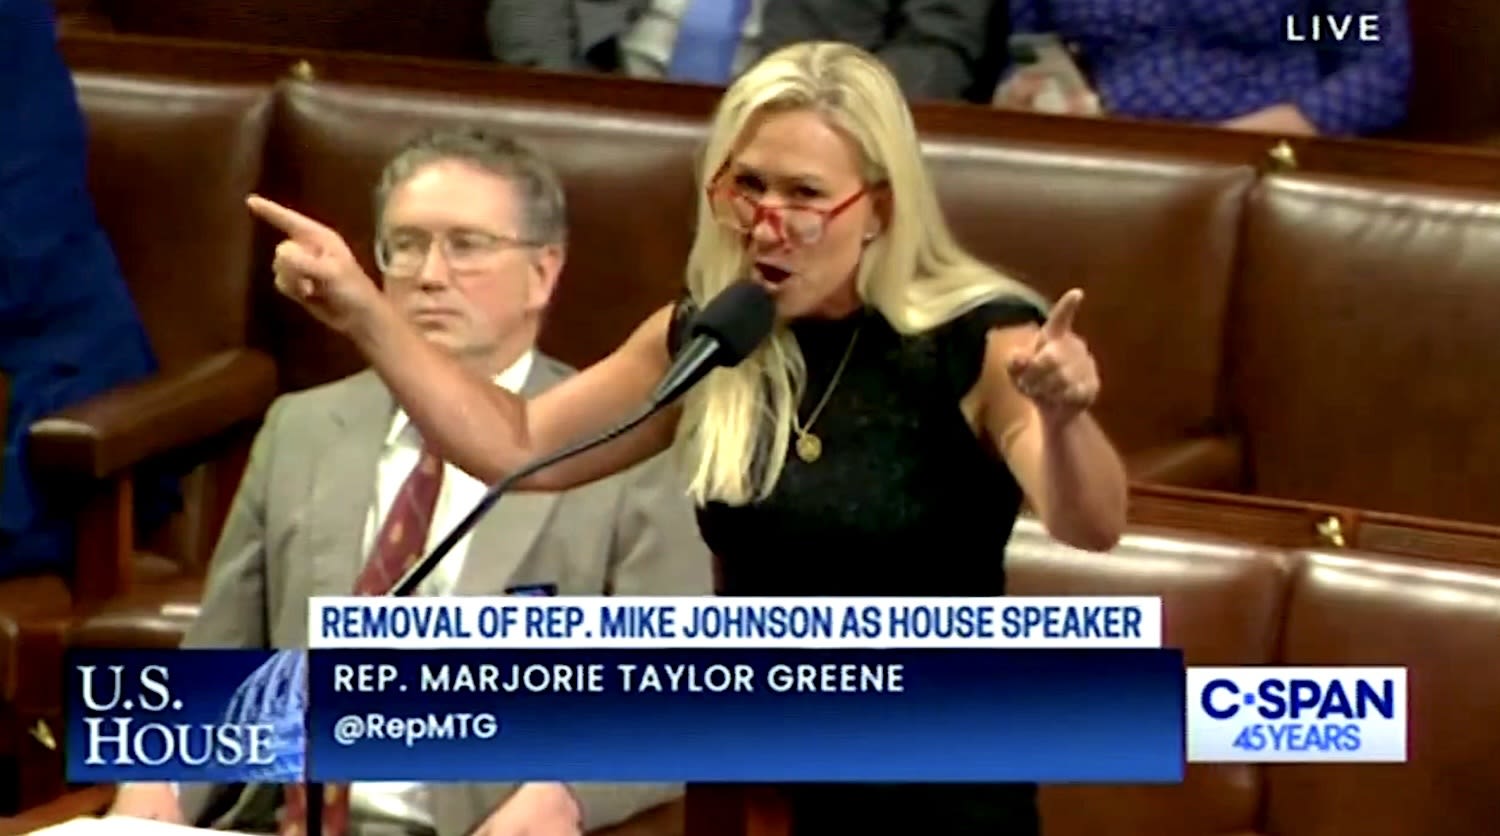 Marjorie Taylor Greene is booed loudly by Congress, then tries — but fails — to oust Mike Johnson (video)